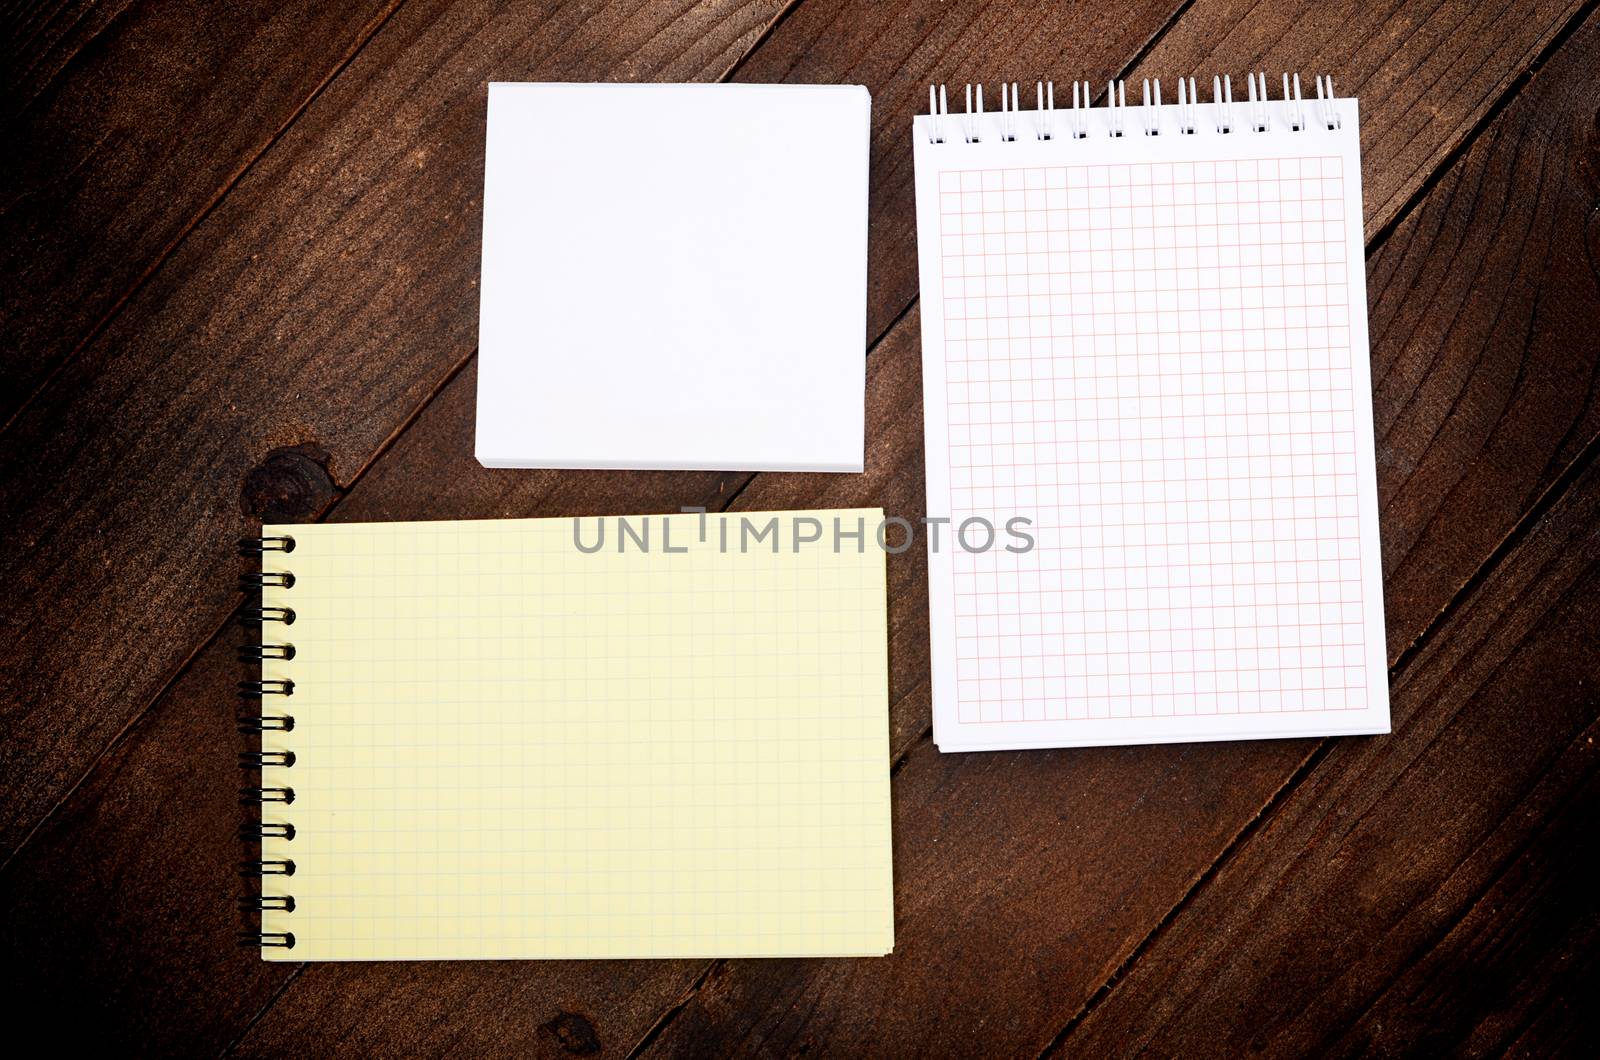 The different notebooks on a wooden table